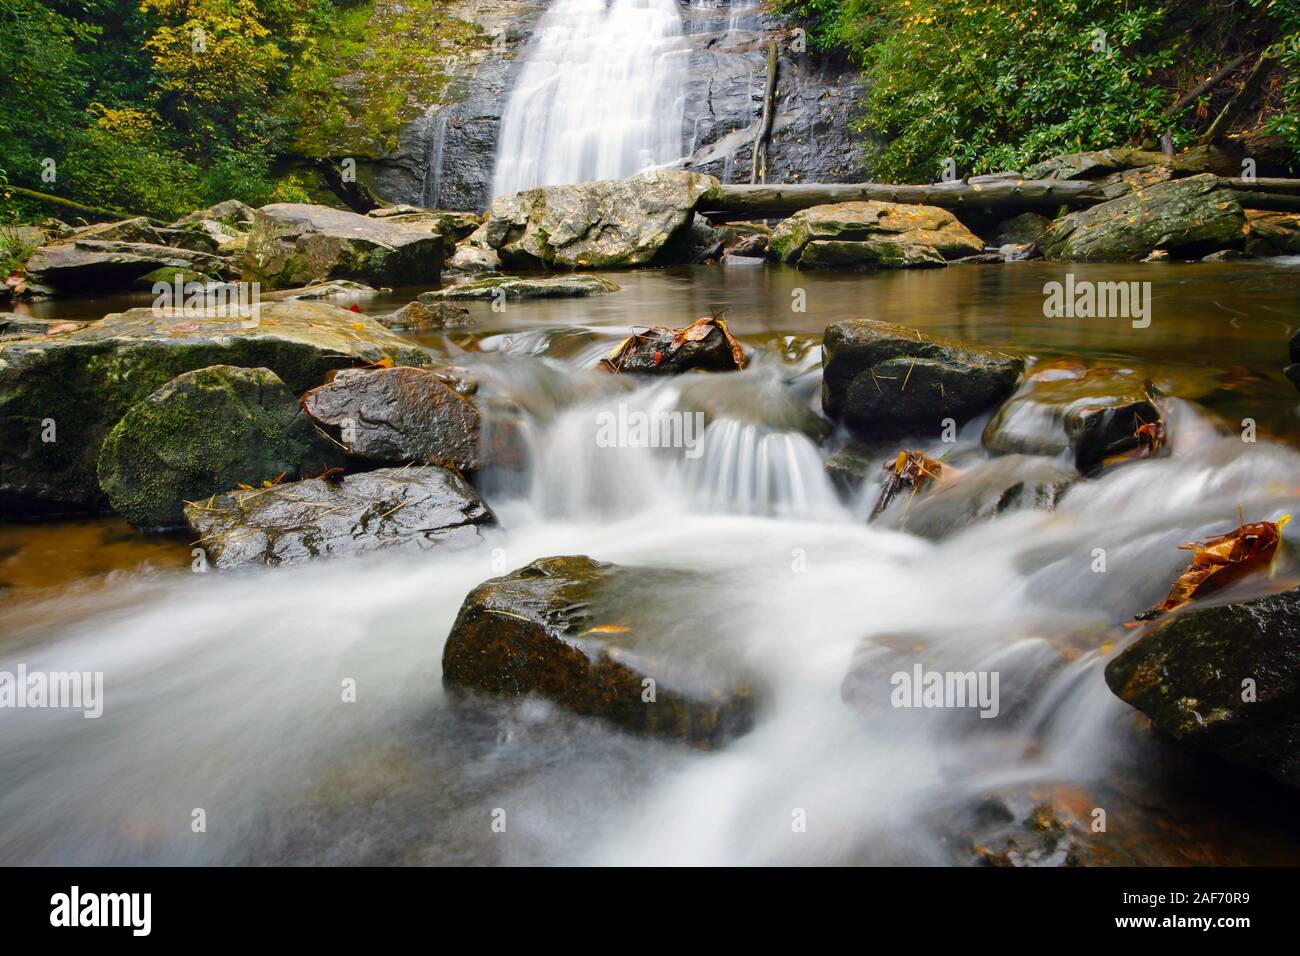 A fall view of Helton Creek Falls in the Chattahoochee National Forest, USA. Stock Photo